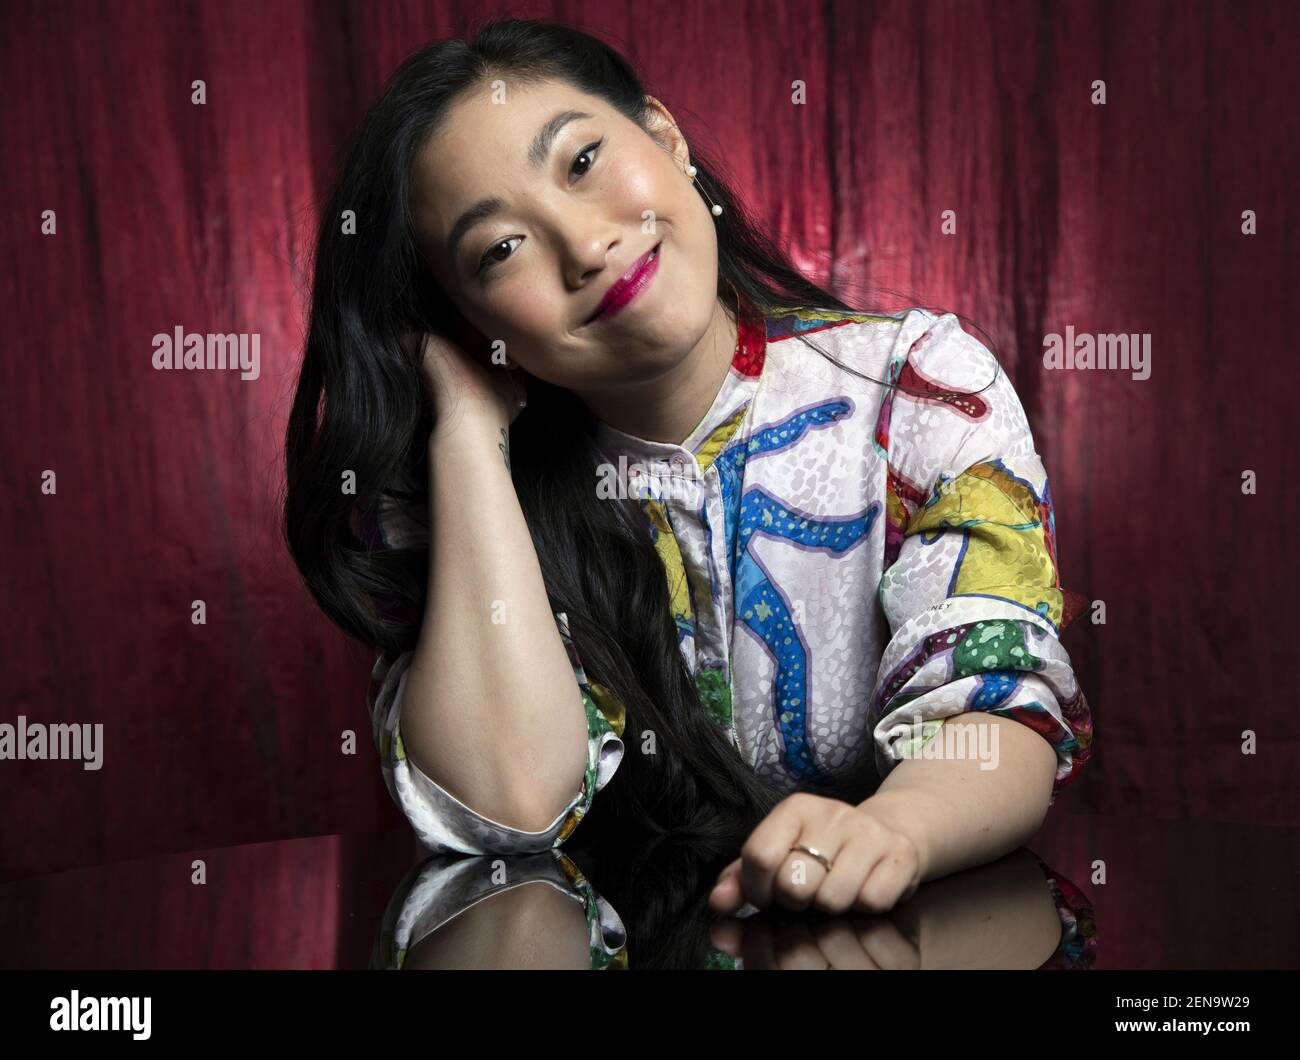 June 26, 2019; Beverly Hills, CA, USA; Awkwafina stars in the new film 'The Farewell' based on the true story of a Chinese-American twenty-something traveling home to China to say goodbye to her ailing grandmother. Portrait shoot at the Four Seasons Hotel Los Angeles at Beverly Hills. Mandatory Credit: Robert Hanashiro-USA TODAY/Sipa USA Stock Photo